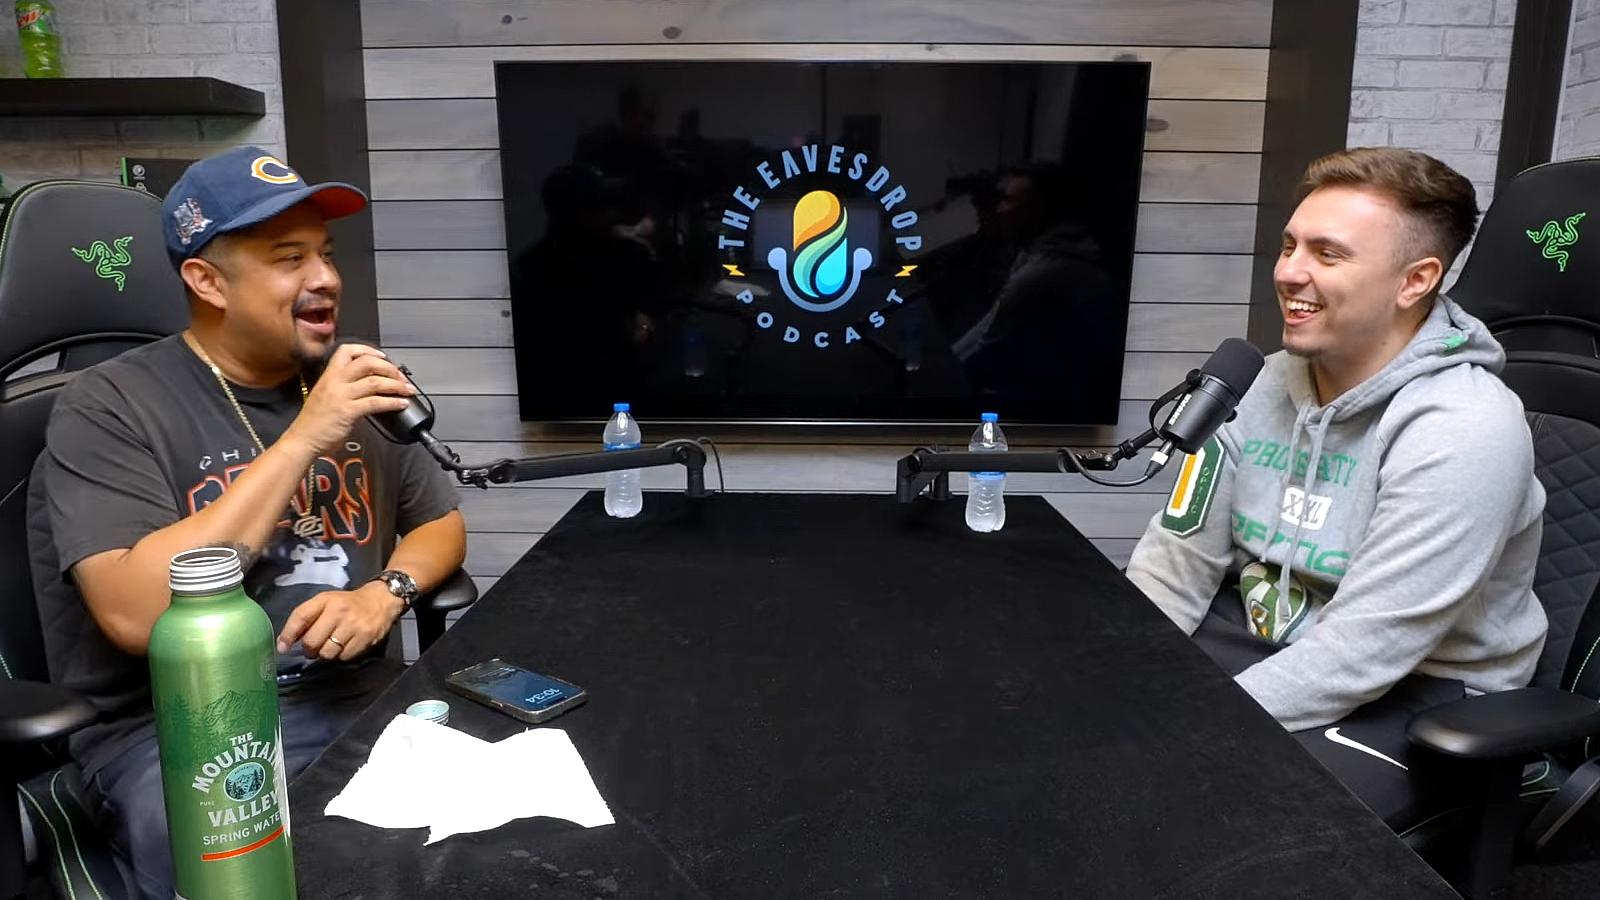 hecz and pred sitting on the set of the Eavesdrop podcast